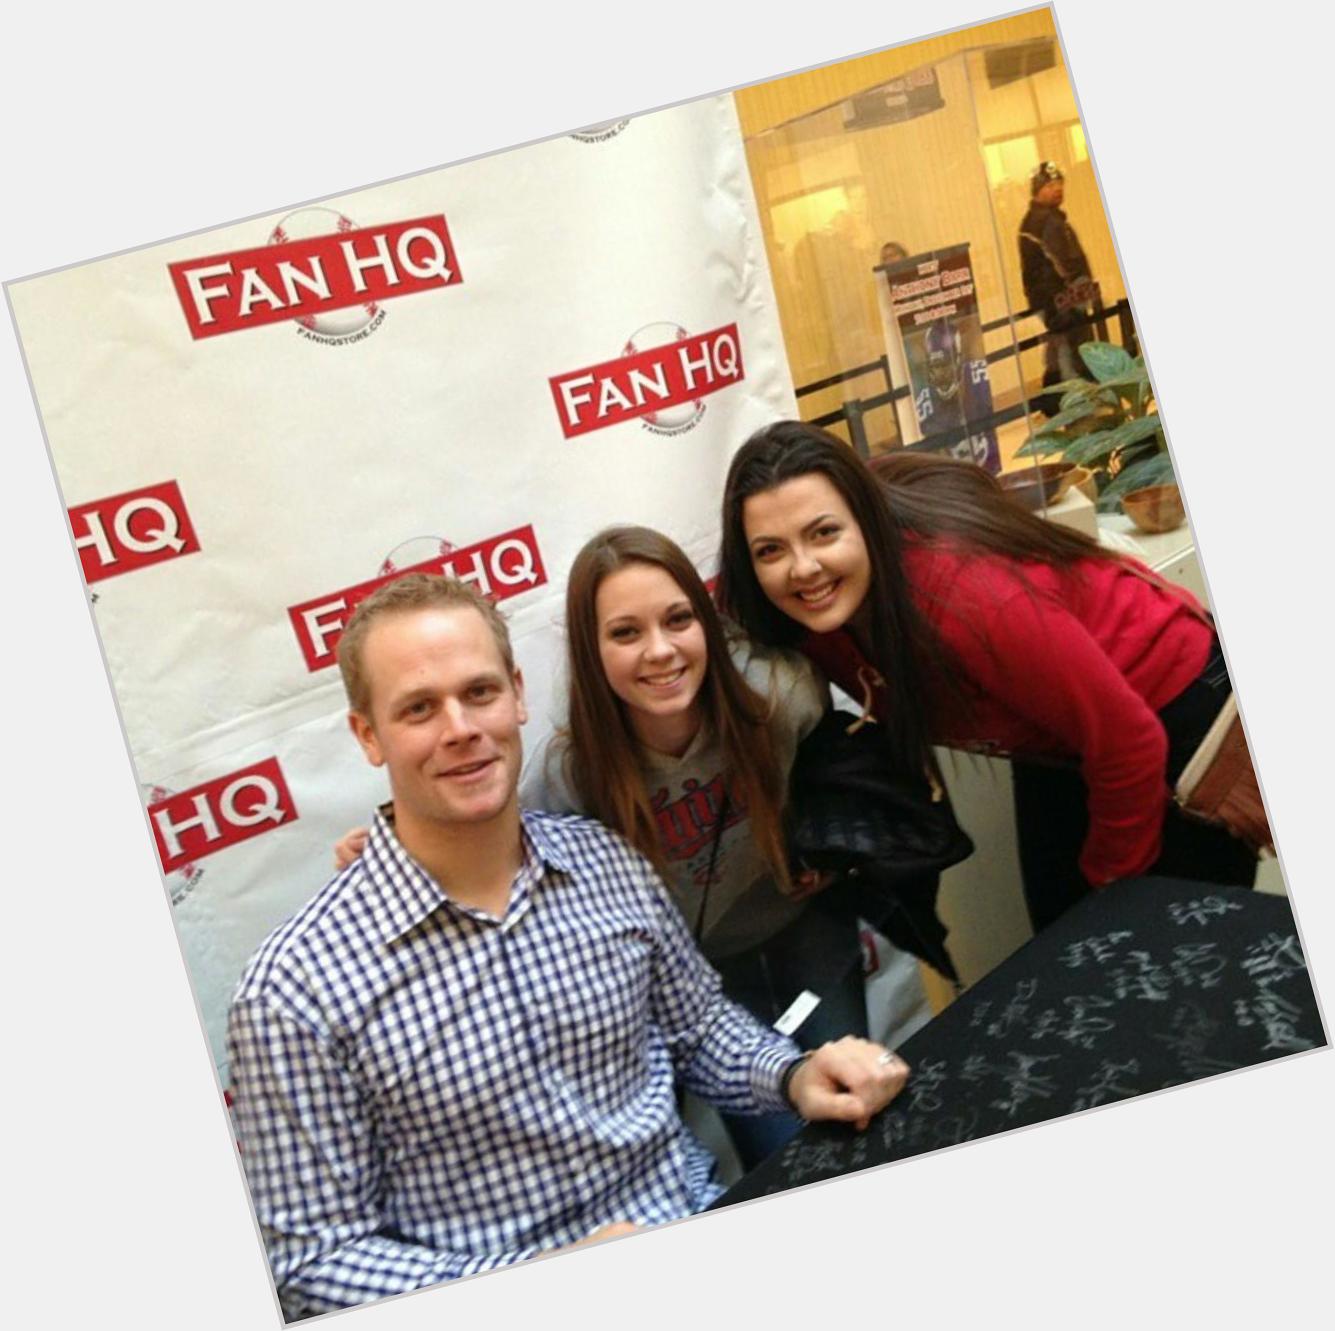 HAPPY BIRTHDAY TO MY FAVORITE, JUSTIN MORNEAU!  still so grateful that he let us get a picture with him. 